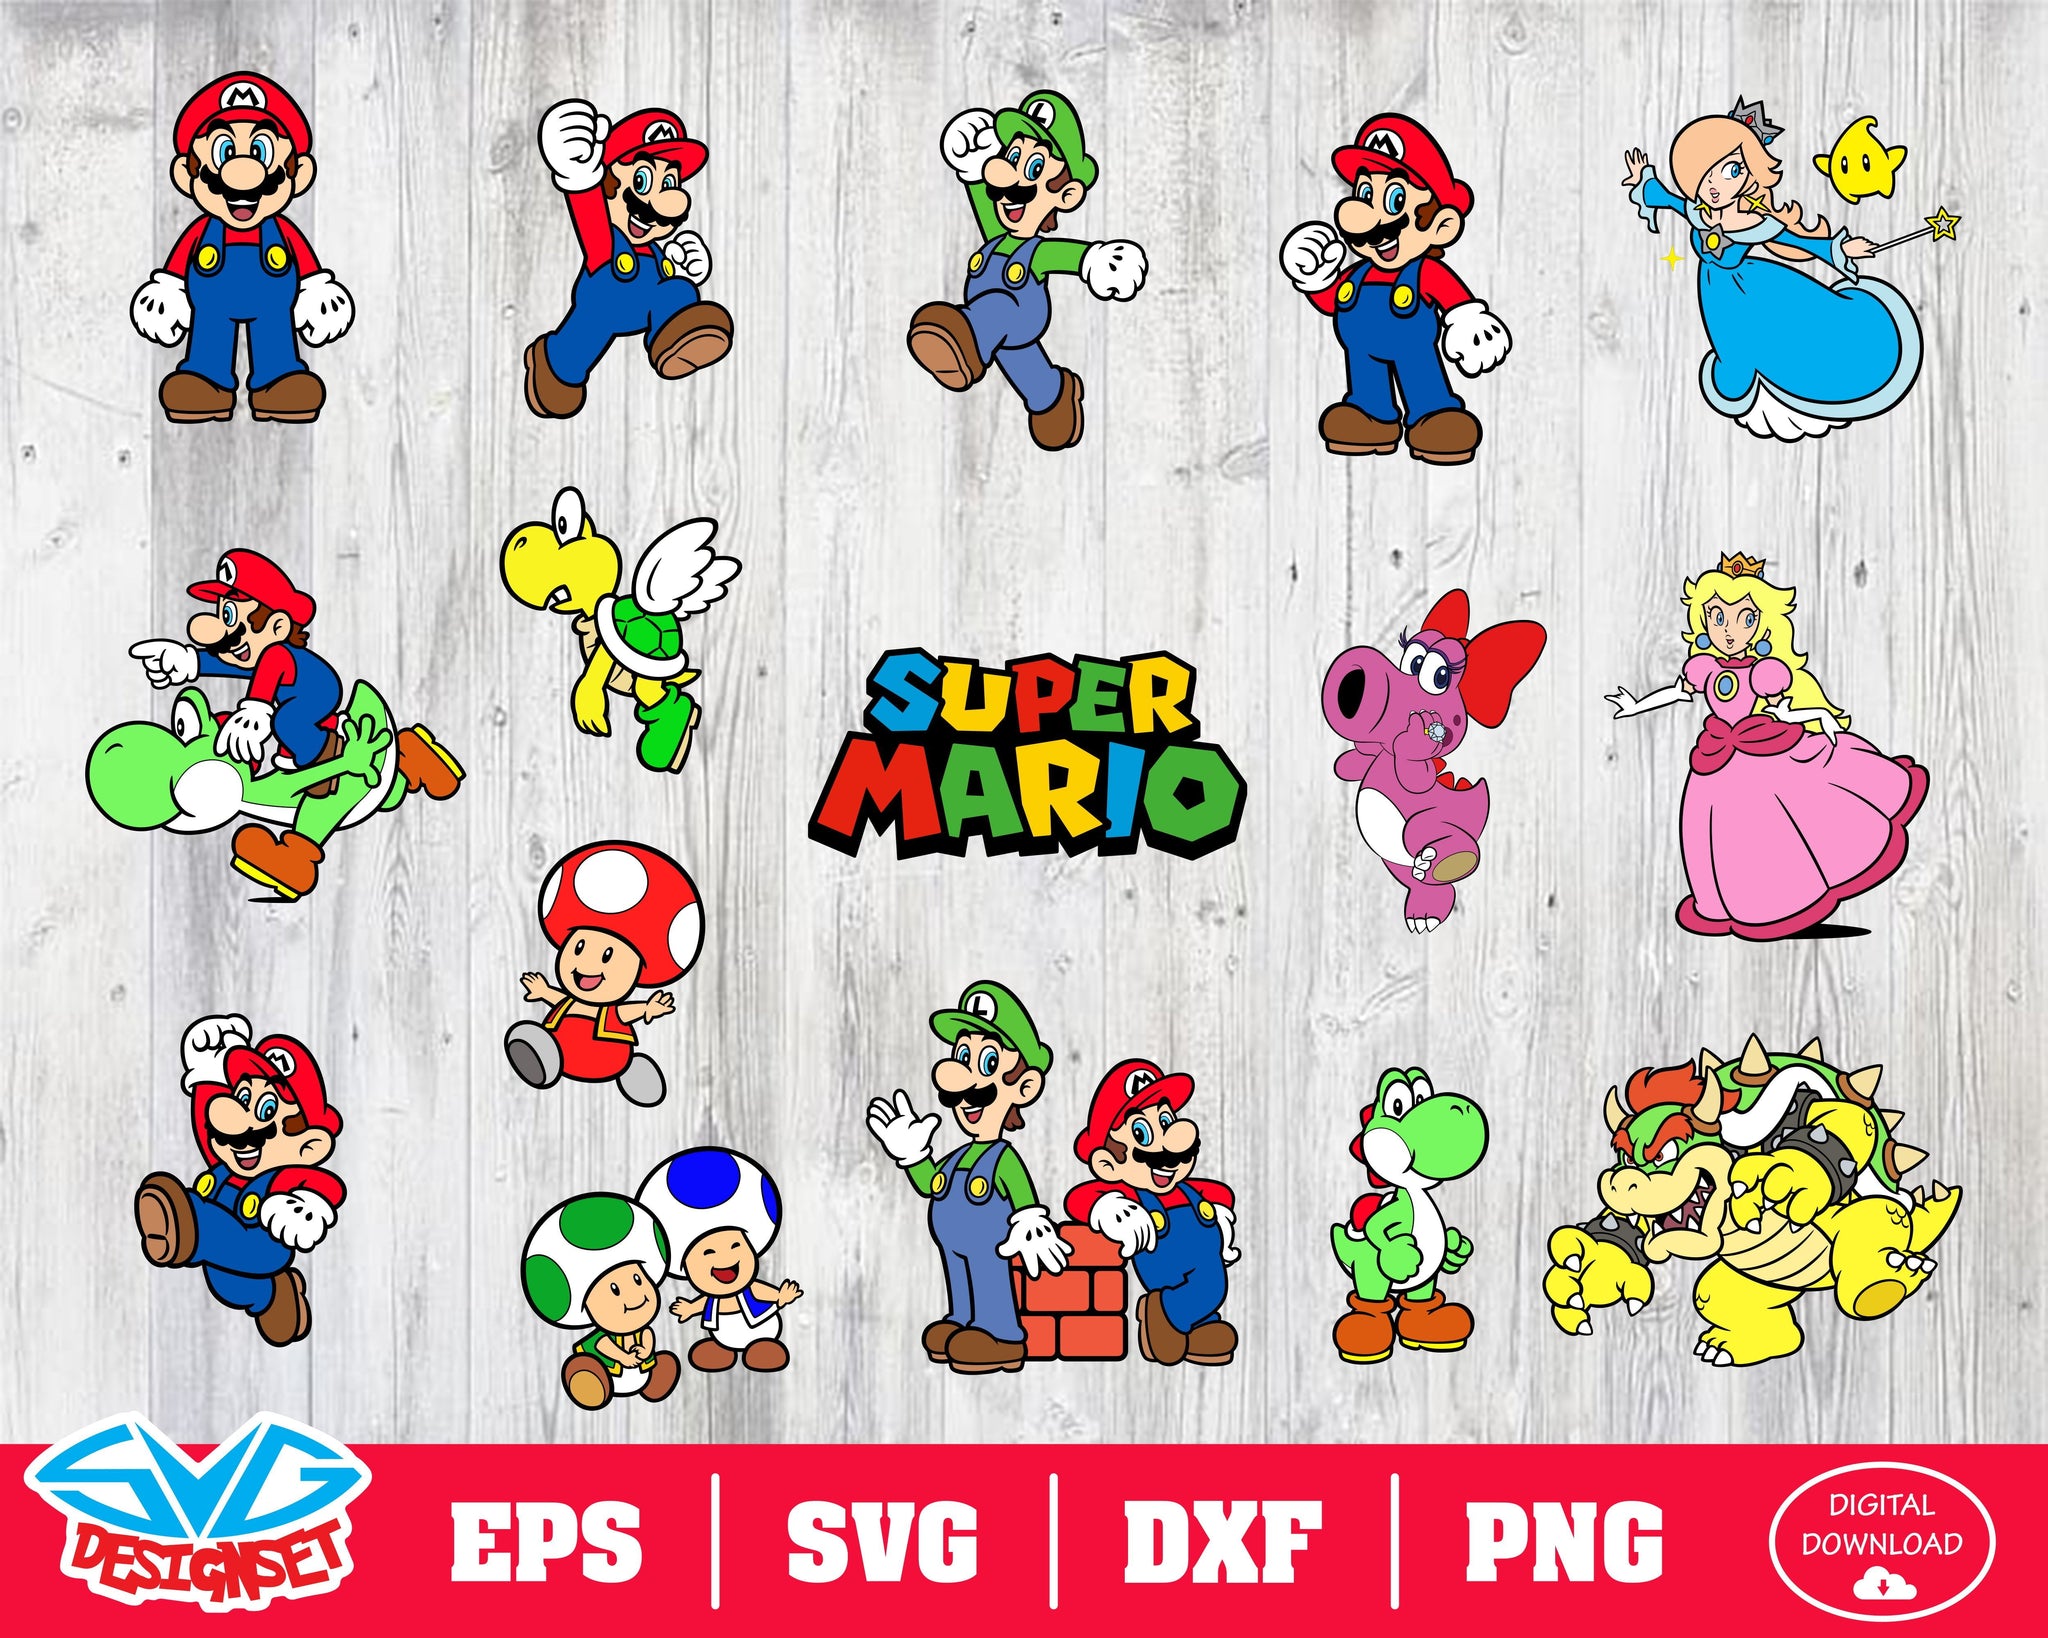 Super Mario Svg, Dxf, Eps, Png, Clipart, Silhouette and Cutfiles #1 - SVGDesignSets